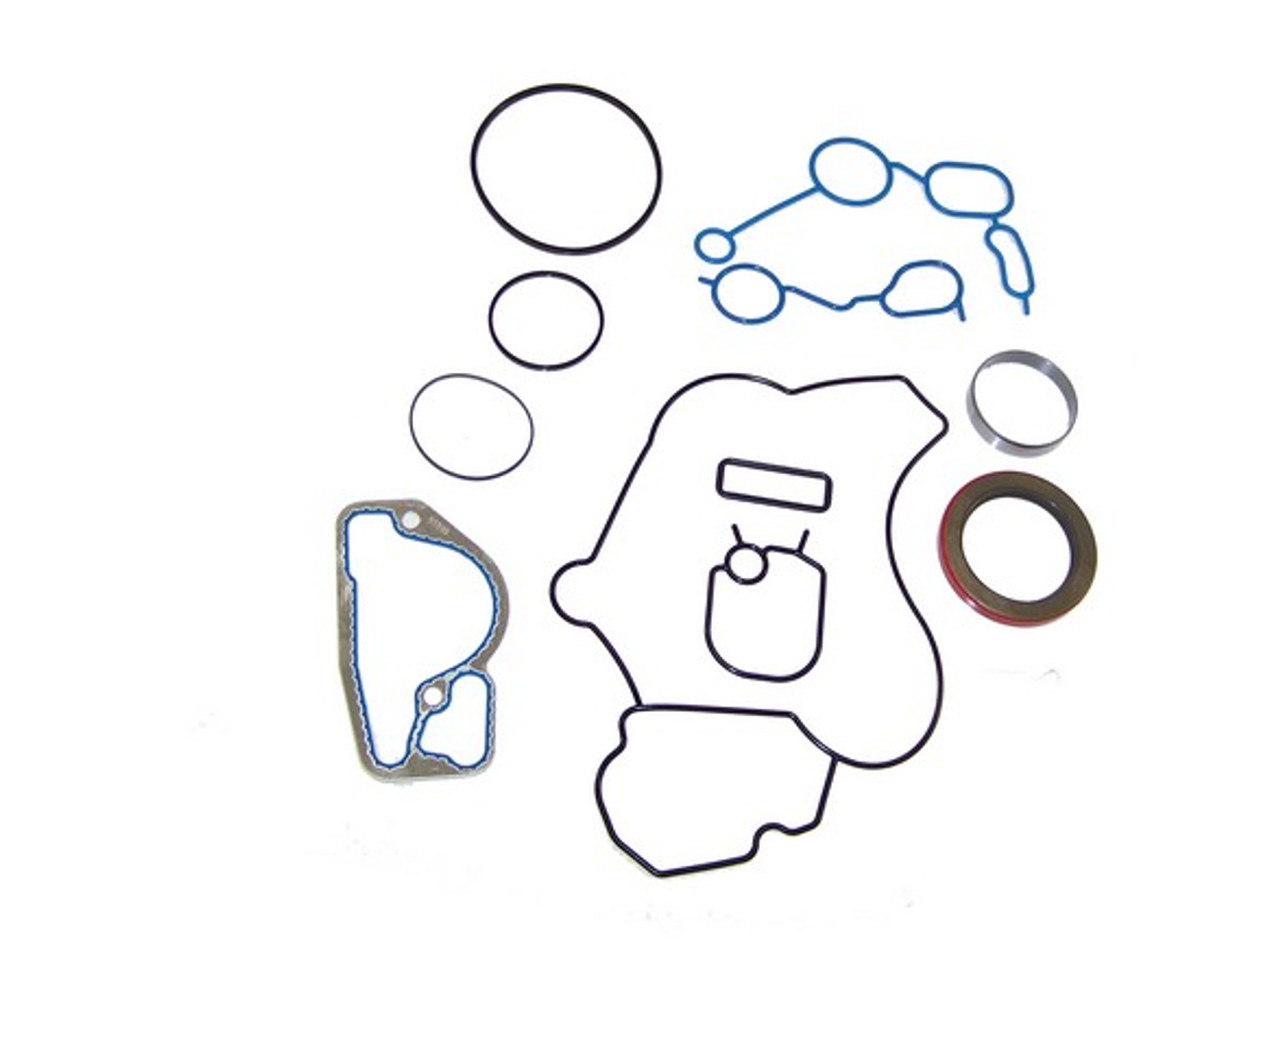 Timing Cover Gasket Set 7.3L 1995 Ford F59 - TC4200.9